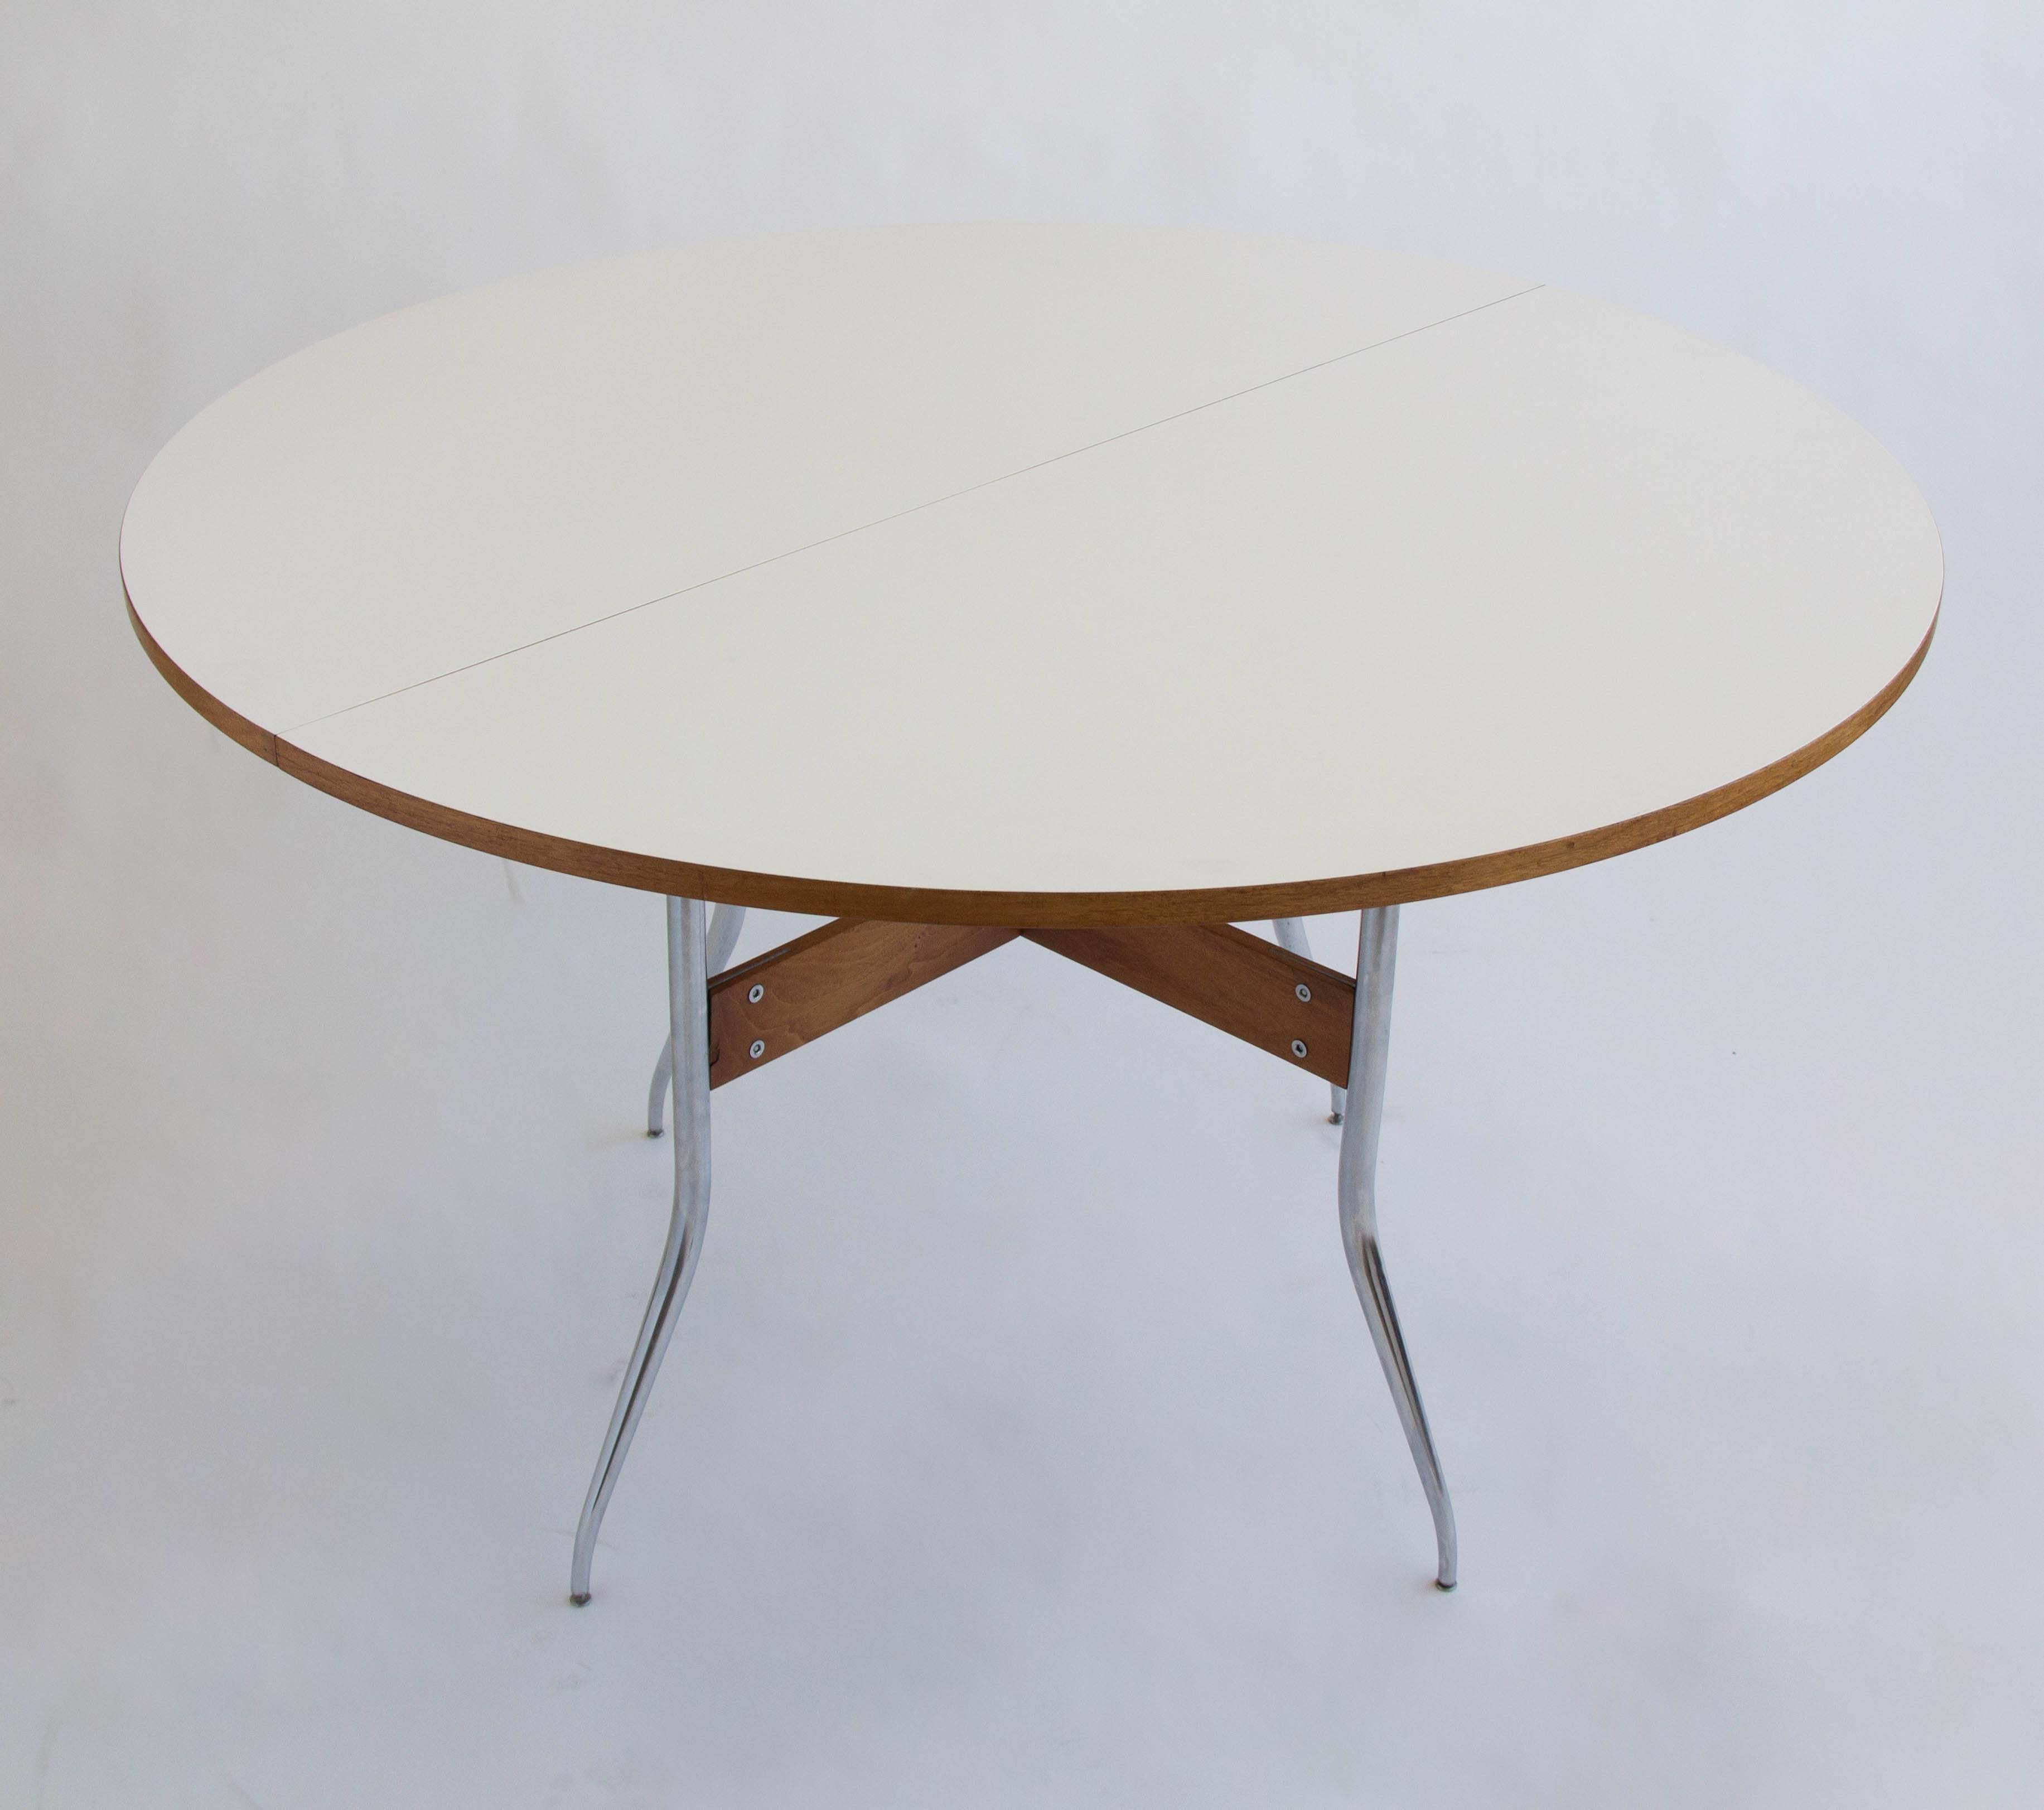 A round dining table from George Nelson’s coveted ‘Swag Leg’ group for Herman Miller. The white laminate tabletop expands, making it very rare, with a rectangular leaf insert, and is supported on four proprietary kicked out legs of chrome steel with